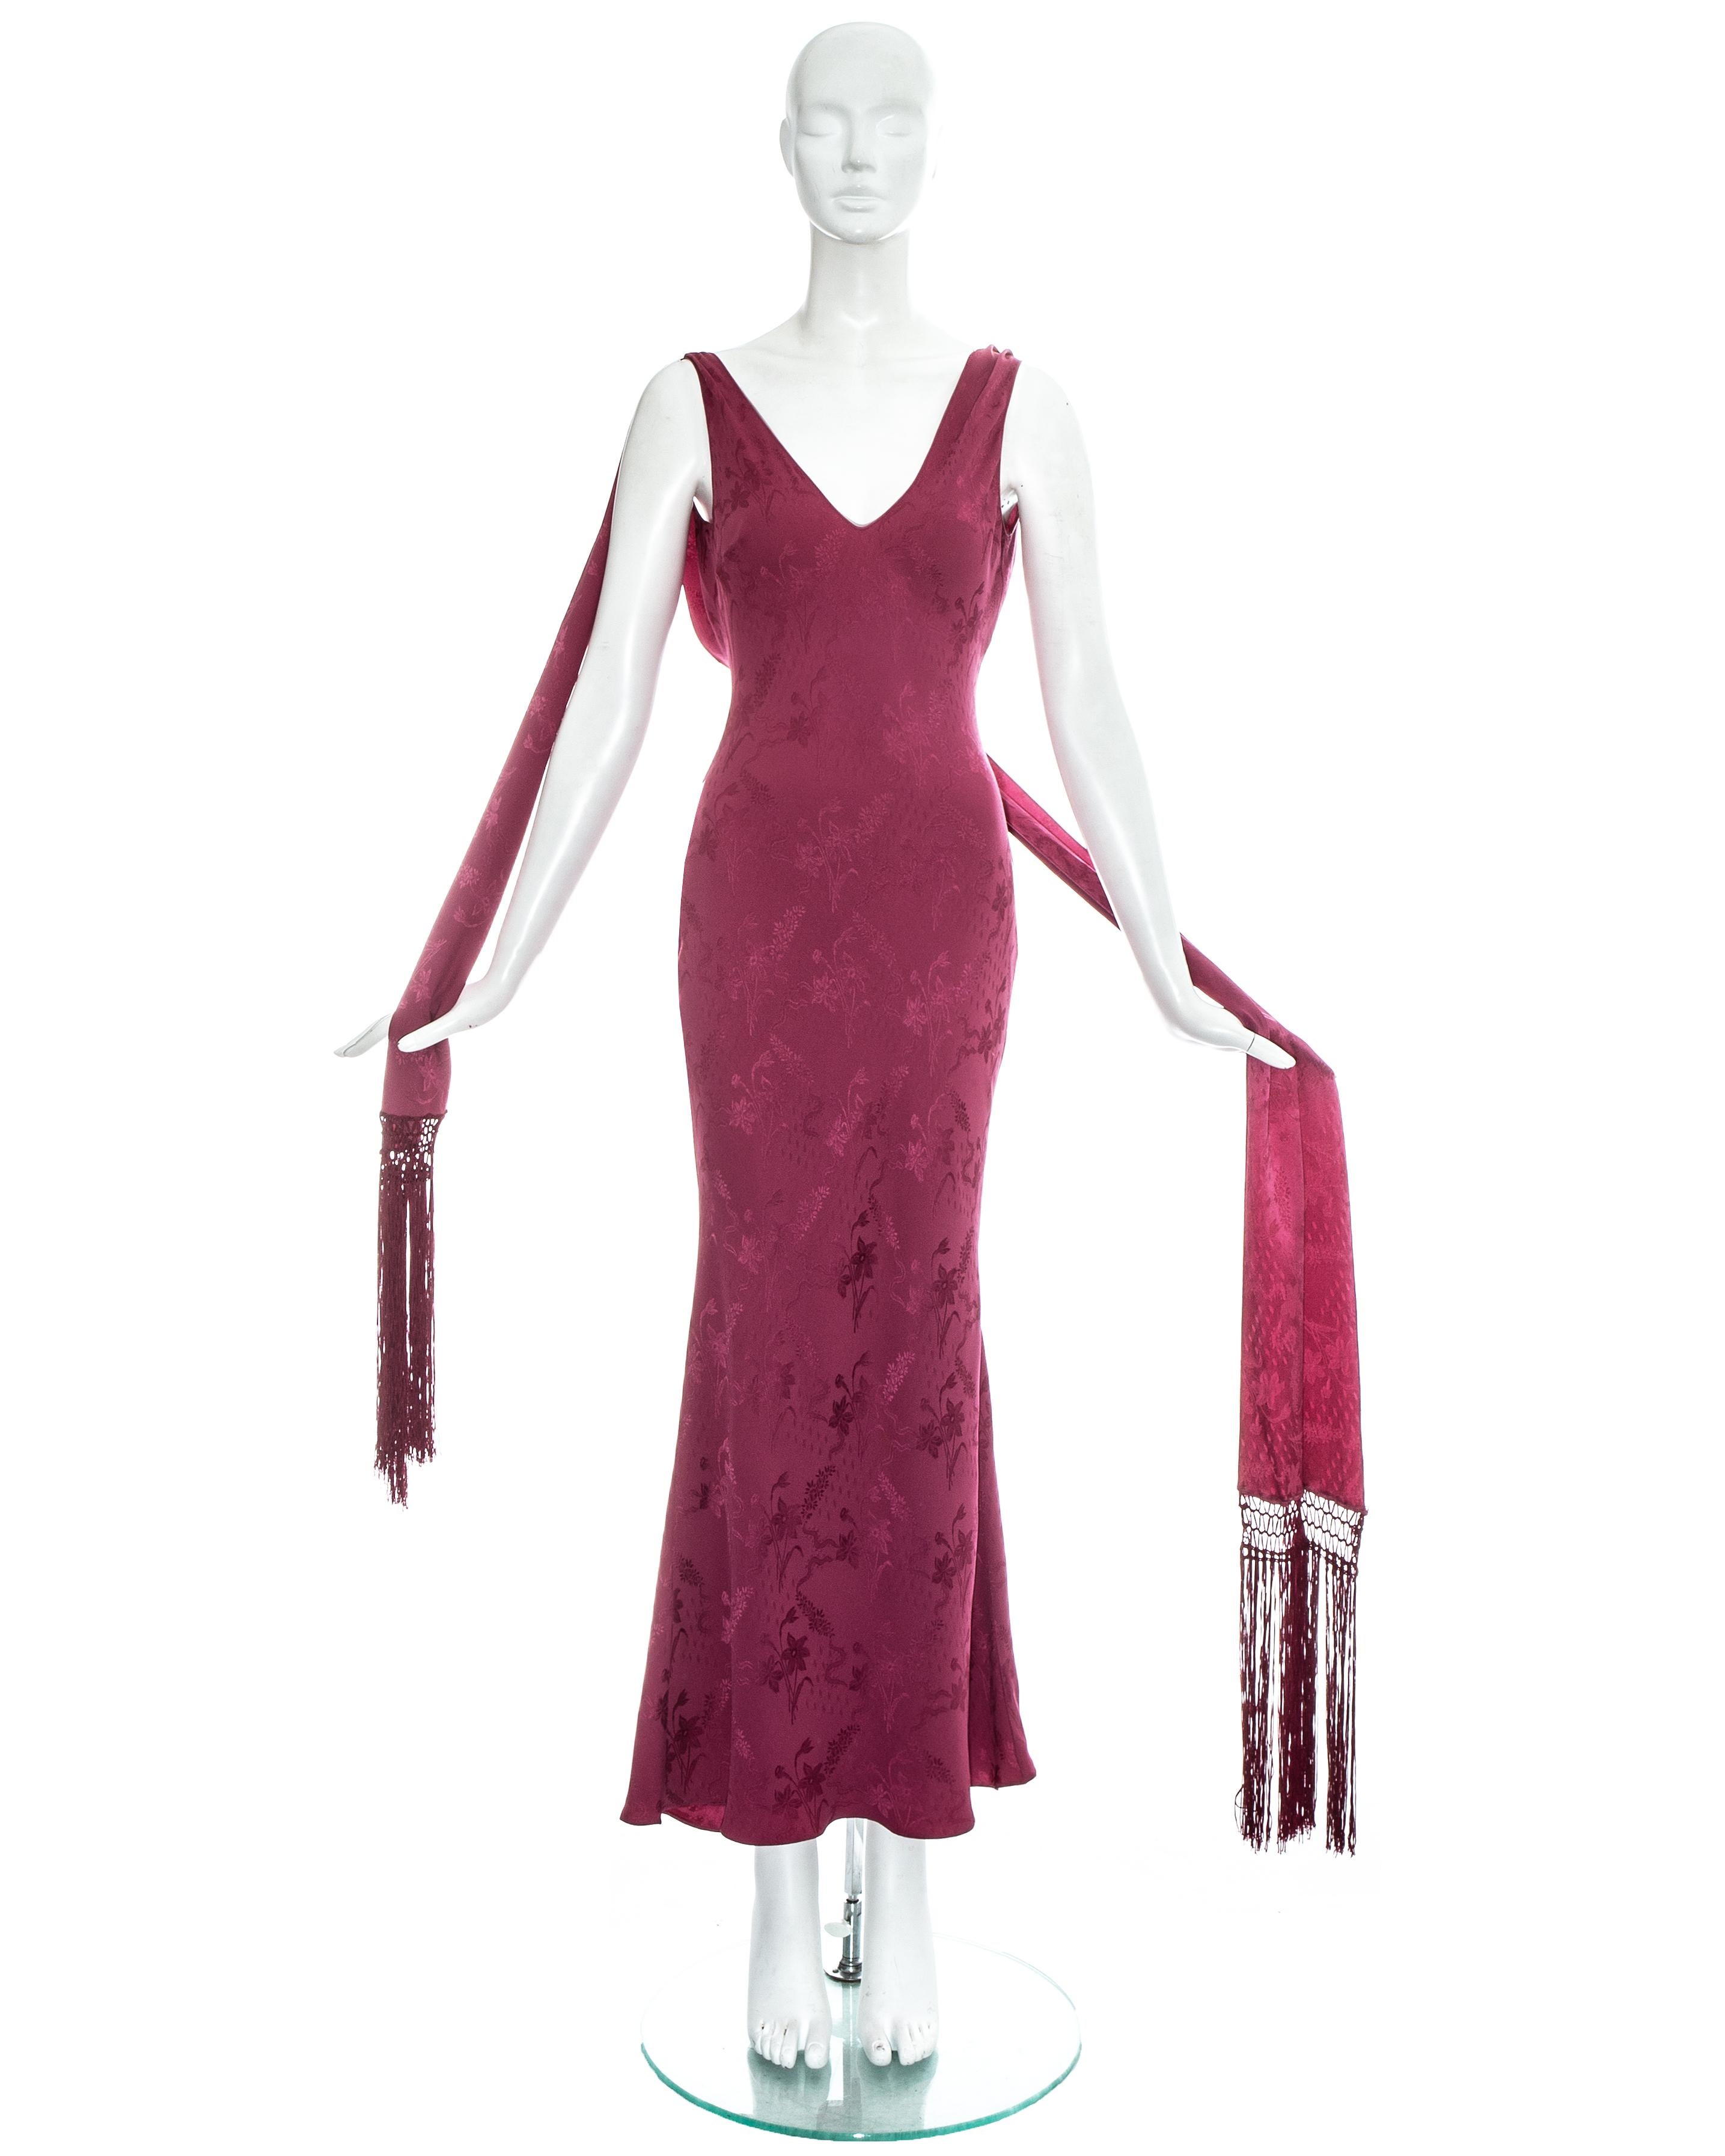 John Galliano rose pink silk brocade evening dress with attached fringed scarf and low back

Spring-Summer 1998